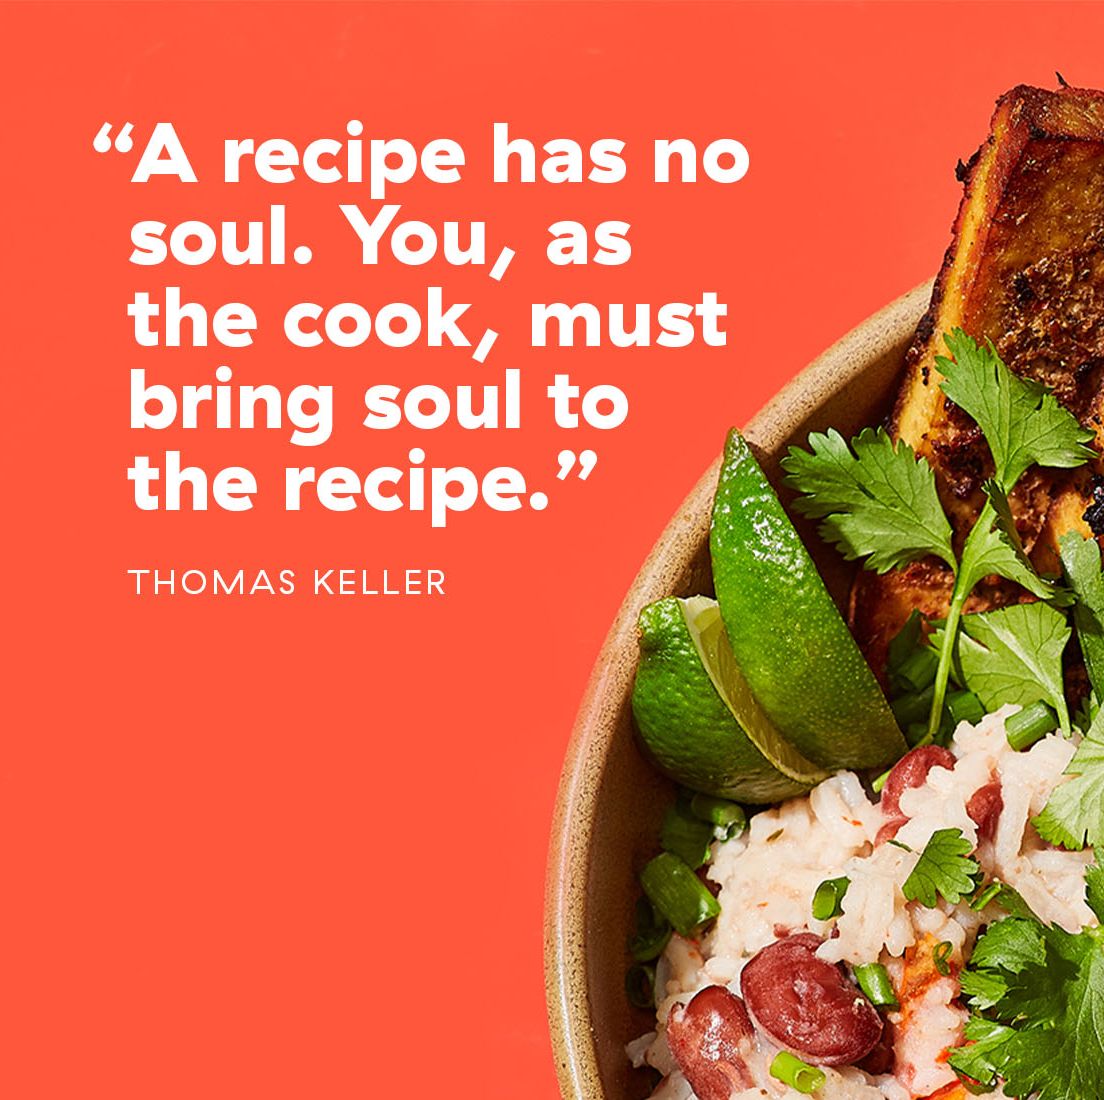 24 Best Food Quotes From Famous Chefs And Celebrities - Great Sayings About  Eating